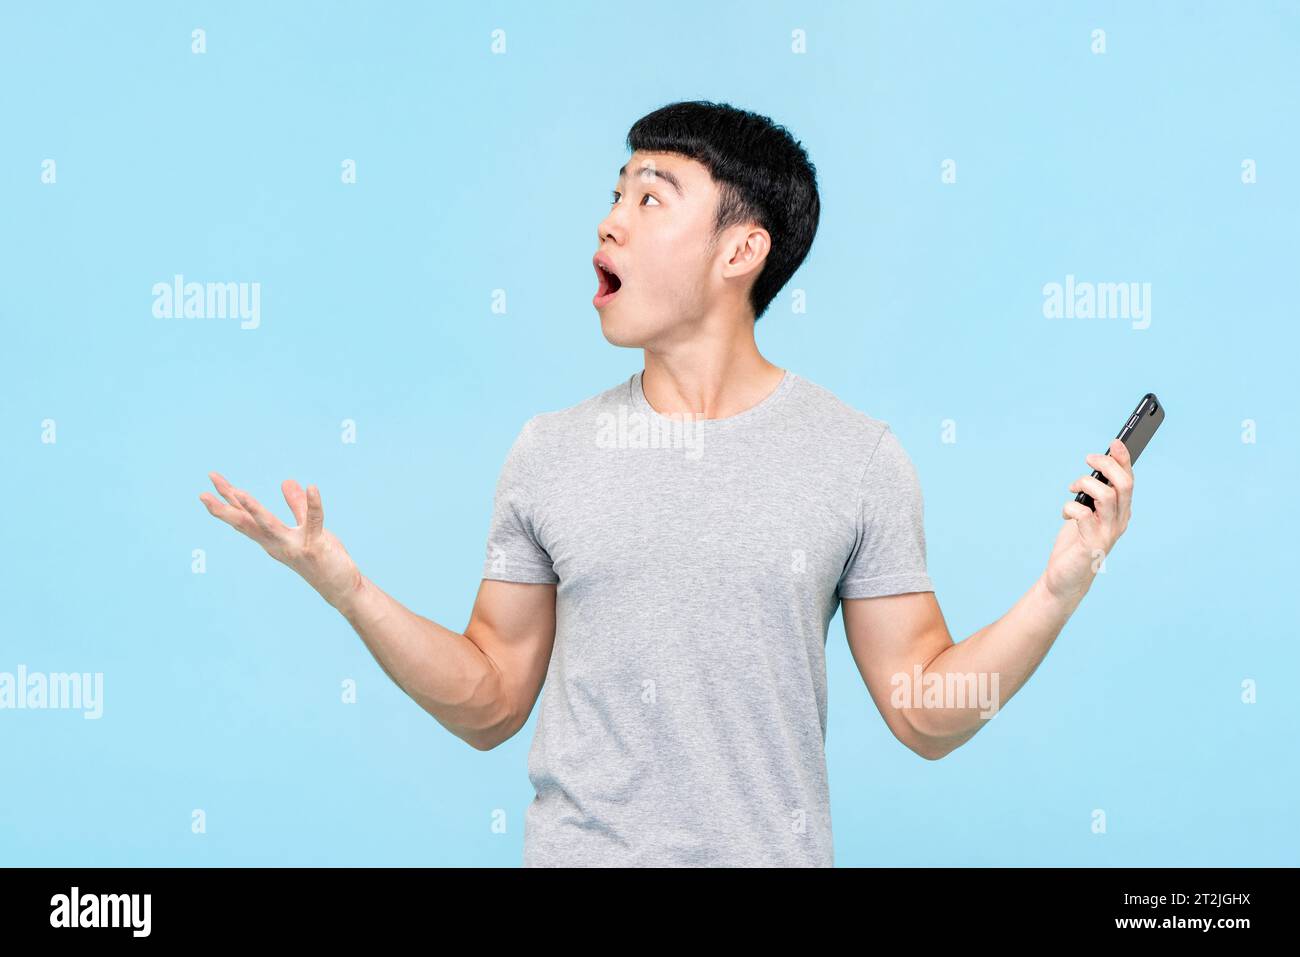 Astonished Asian man with mobile phone in hands looking up while standing on light blue isolated background in studio Stock Photo